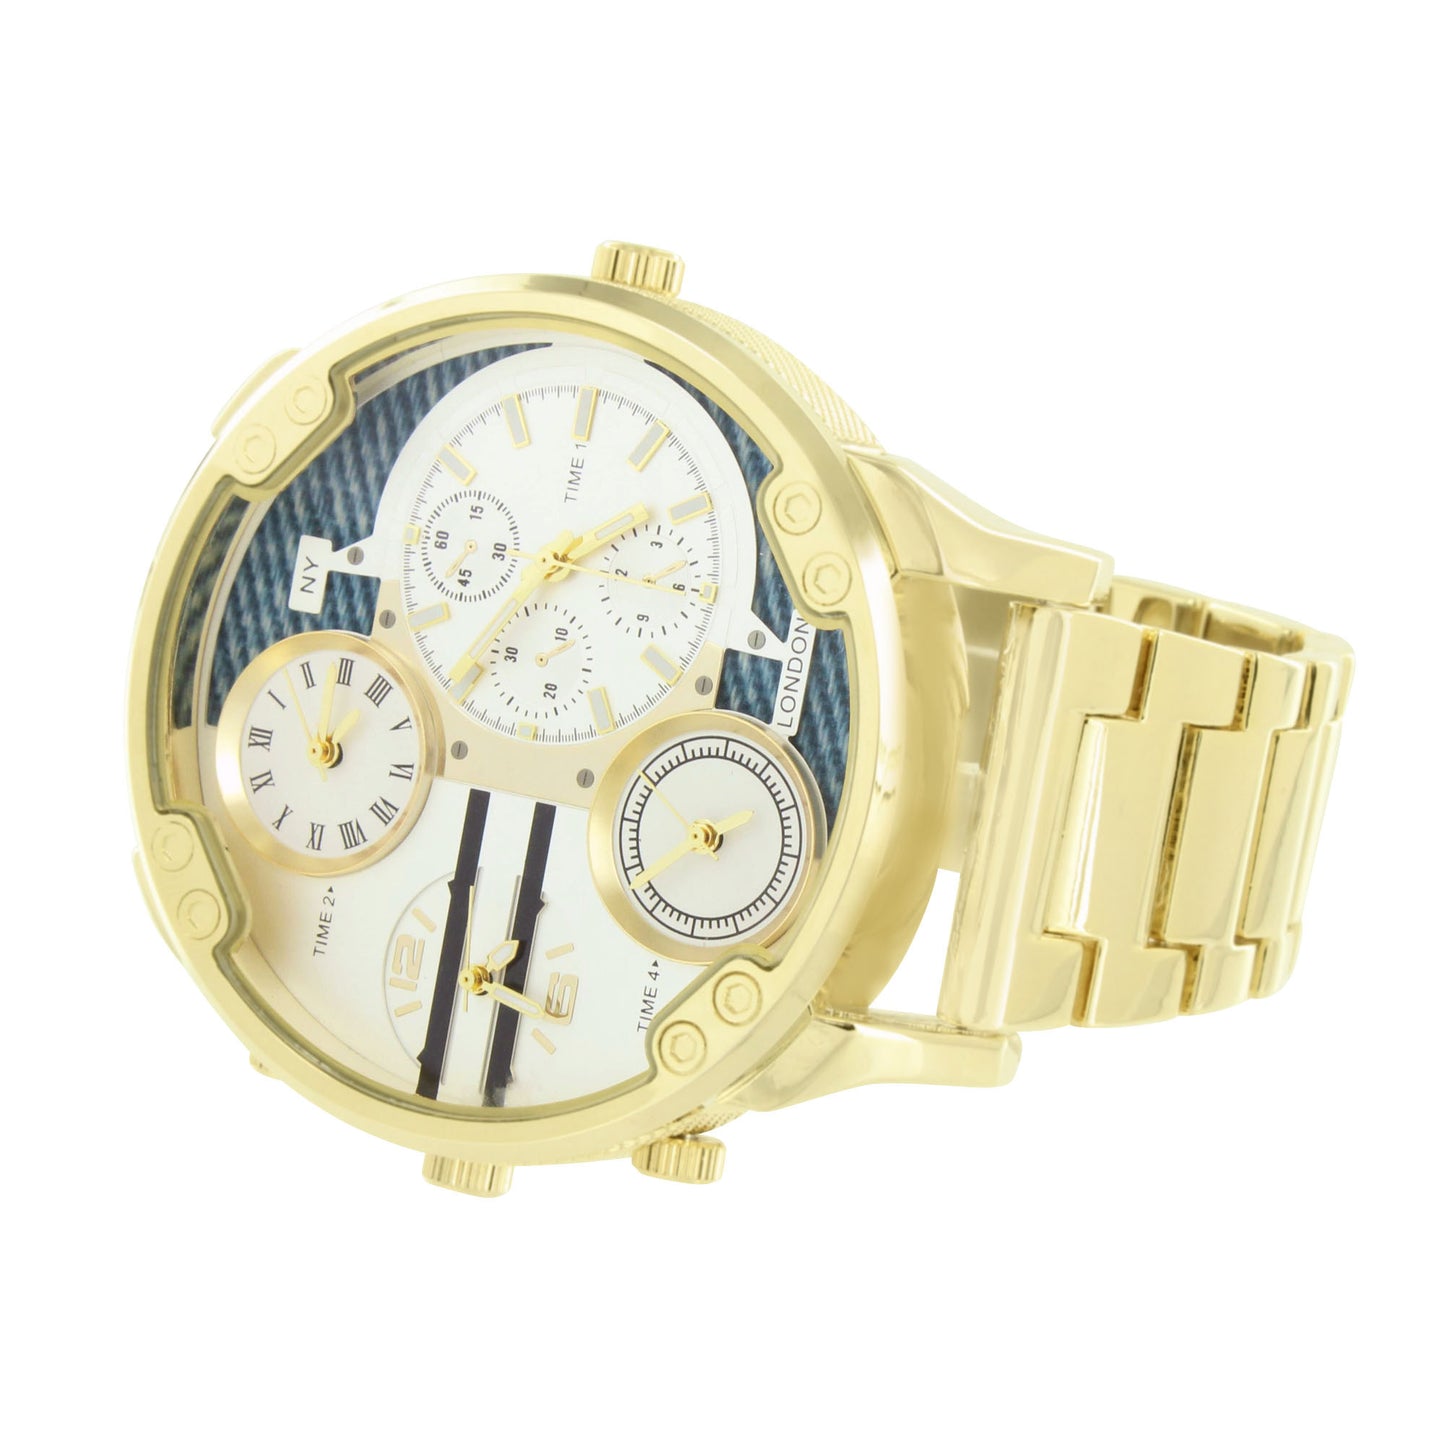 Gold Finish Watch Jumbo Face Stainless Steel Back NY London